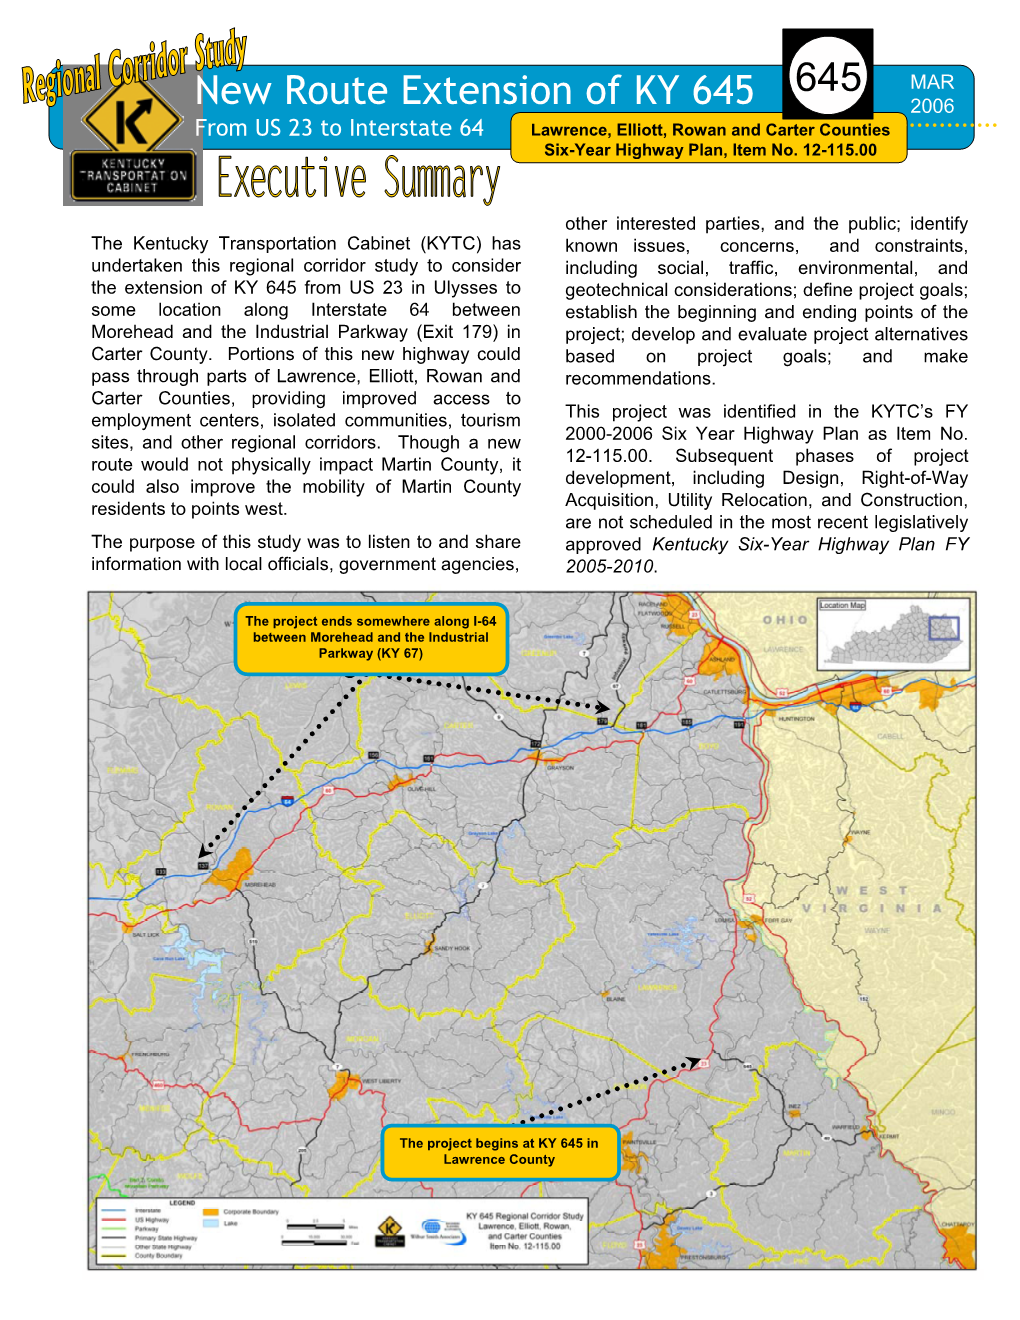 New Route Extension of KY 645 2006 from US 23 to Interstate 64 Lawrence, Elliott, Rowan and Carter Counties Six-Year Highway Plan, Item No